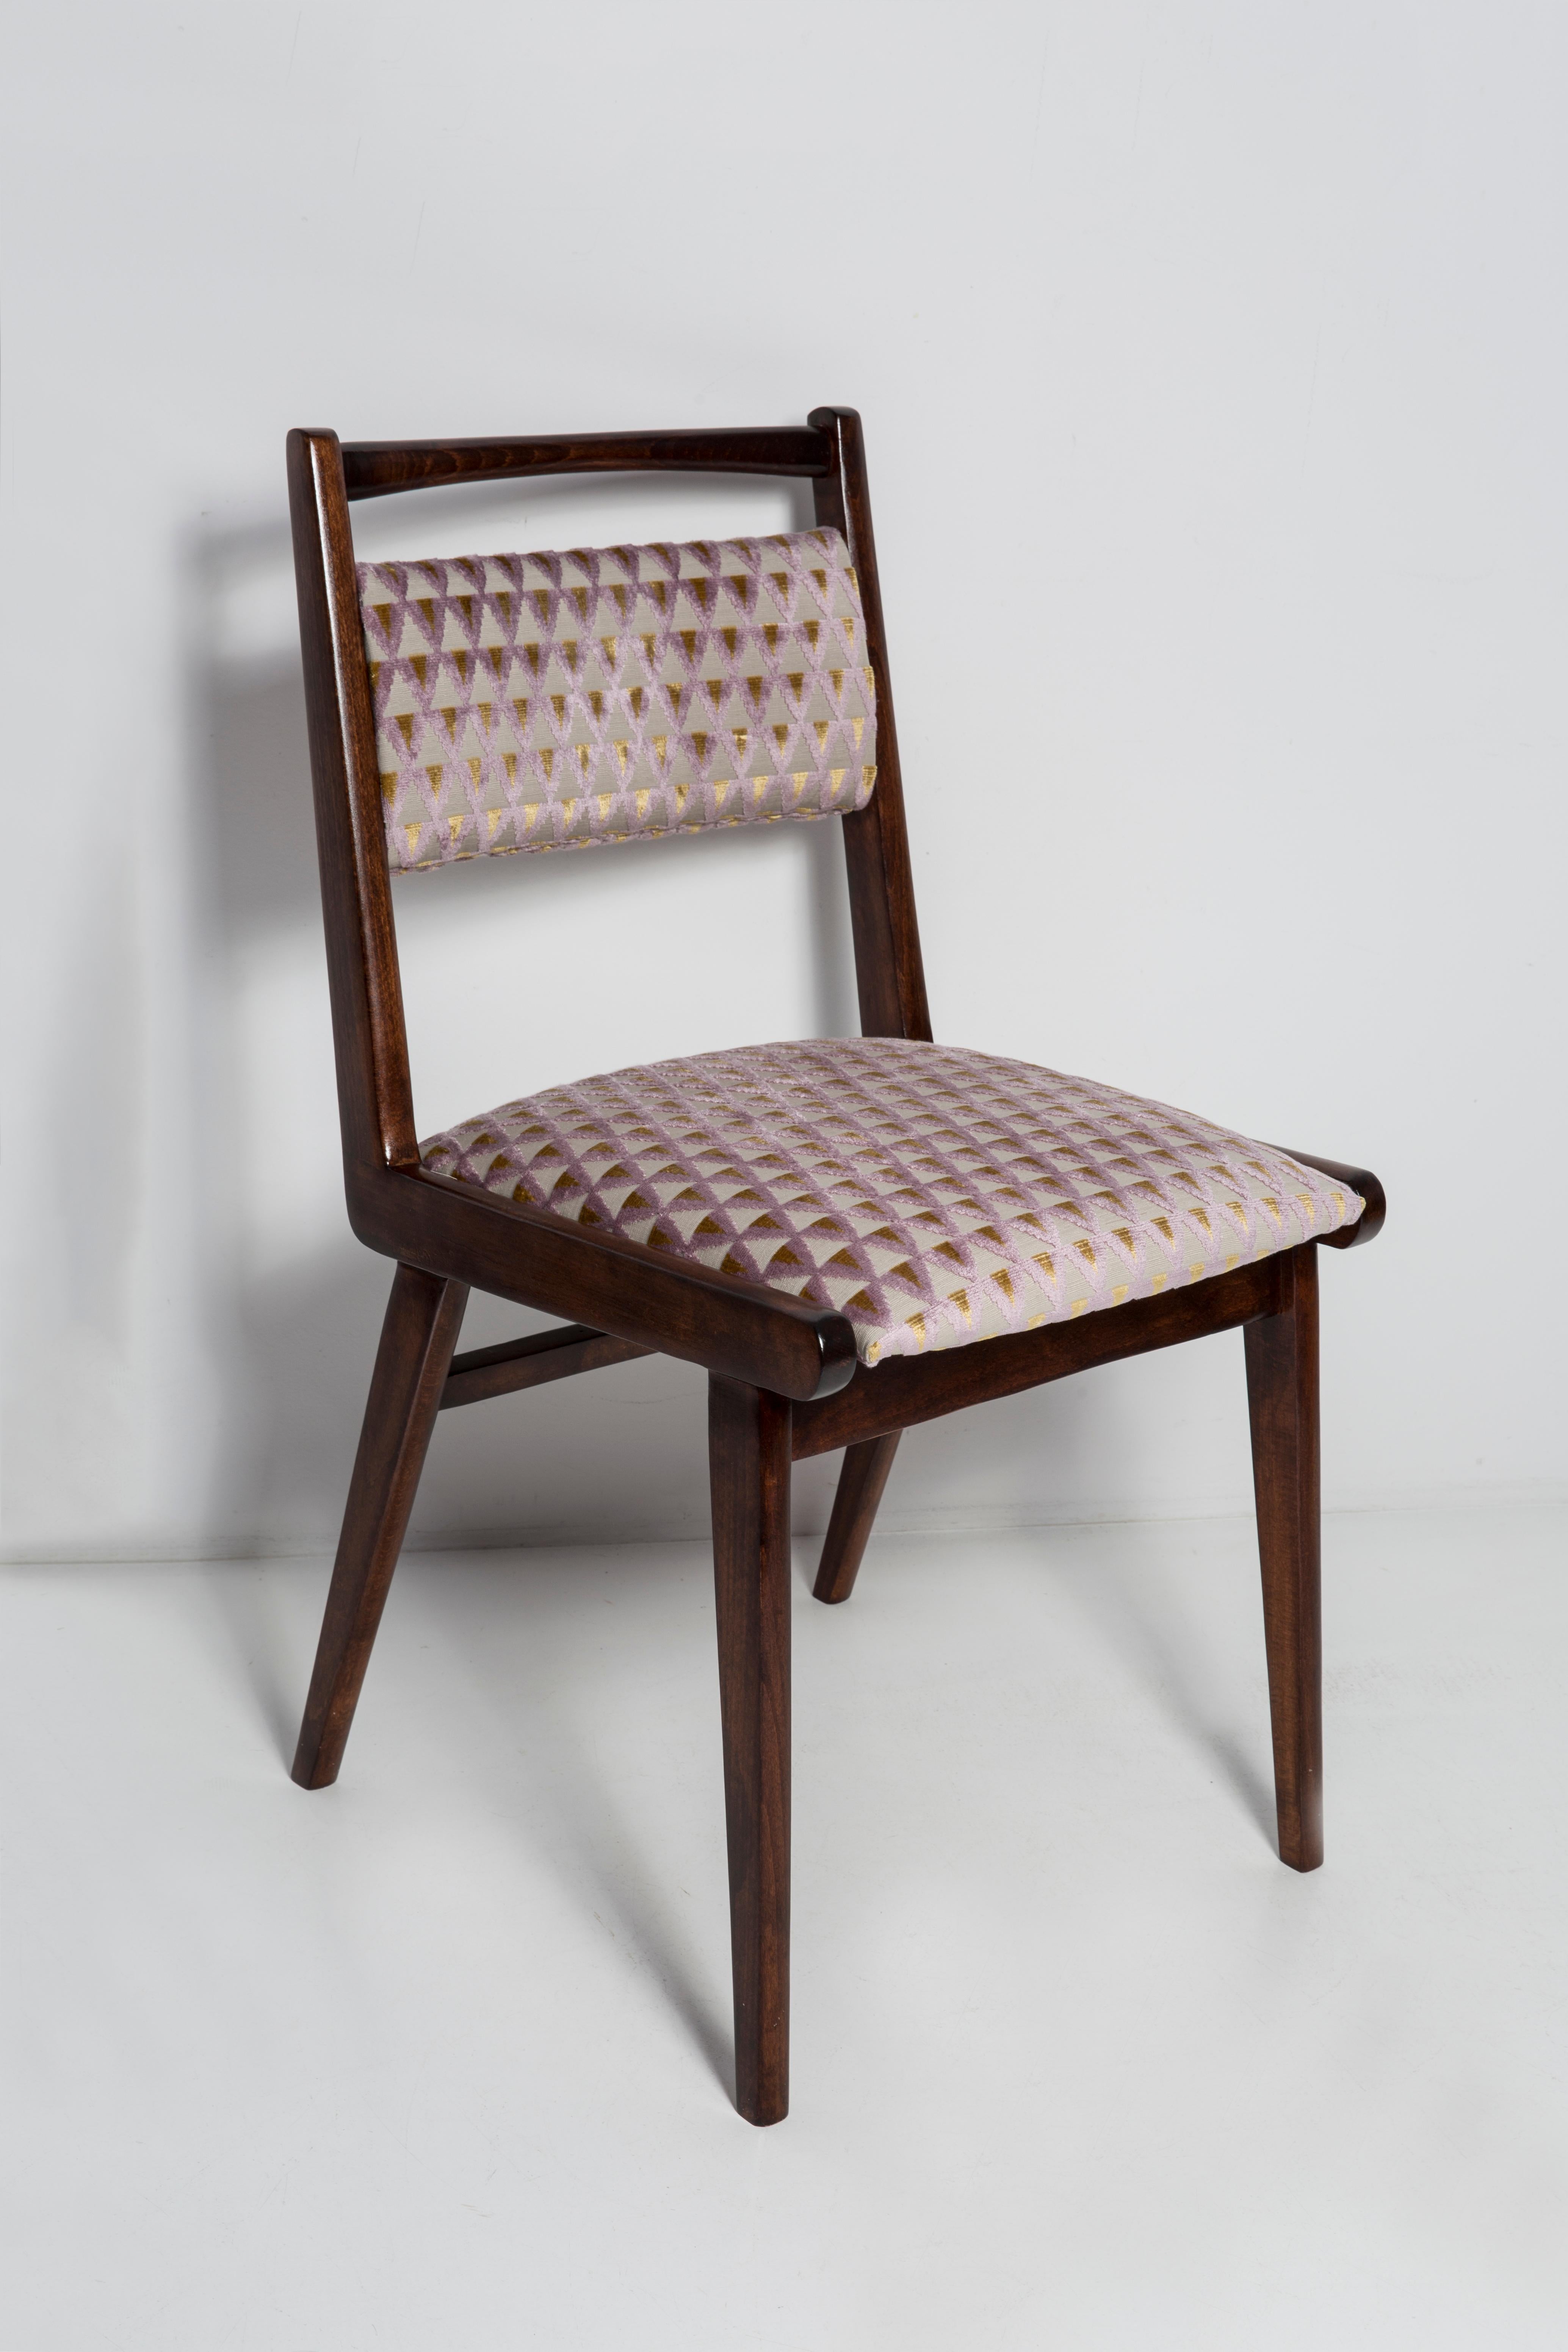 Chairs designed in 1960s by Prof. Rajmund Halas. It is jar type model. 
Made of beechwood. Chairs are after a complete upholstery renovation, the woodwork has been refreshed. Seat and back is dressed in a light purple, durable and pleasant to the